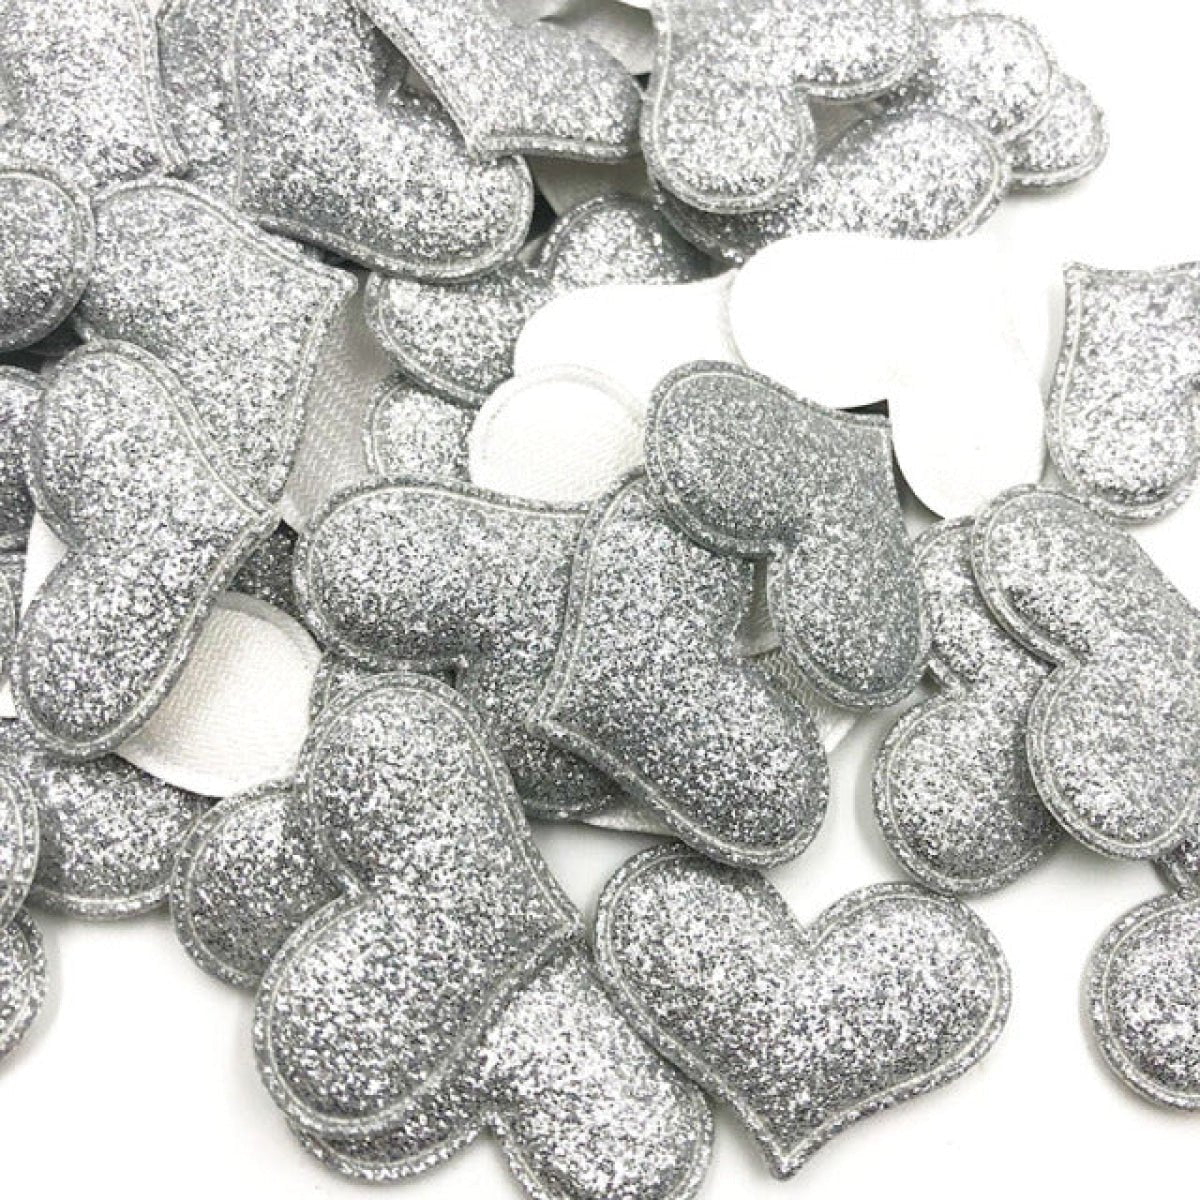 50pcs 35mmx30mm Glitter Padded Heart Felt Patches Appliques For Clothing Sewing DIY Wedding Decoration Toy Craft Shapes PU Leather - Silver - - Asia Sell